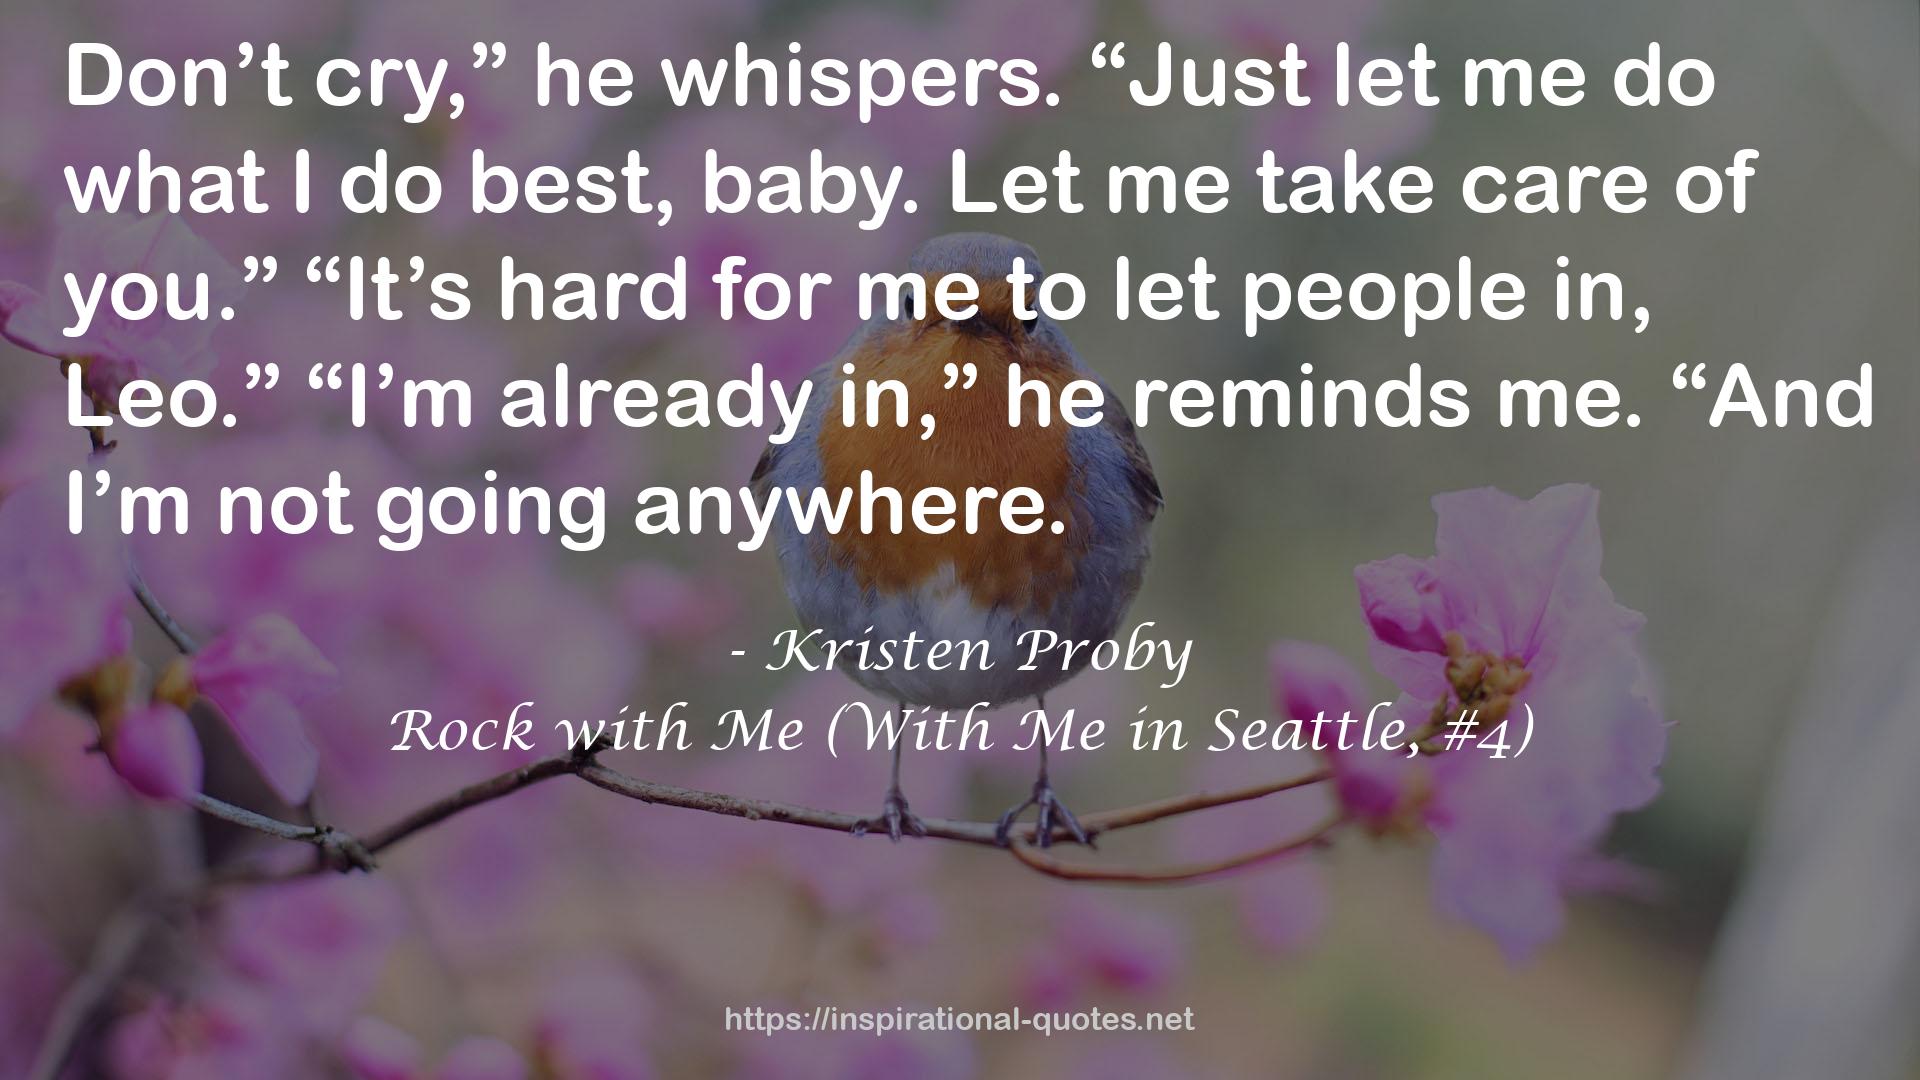 Rock with Me (With Me in Seattle, #4) QUOTES